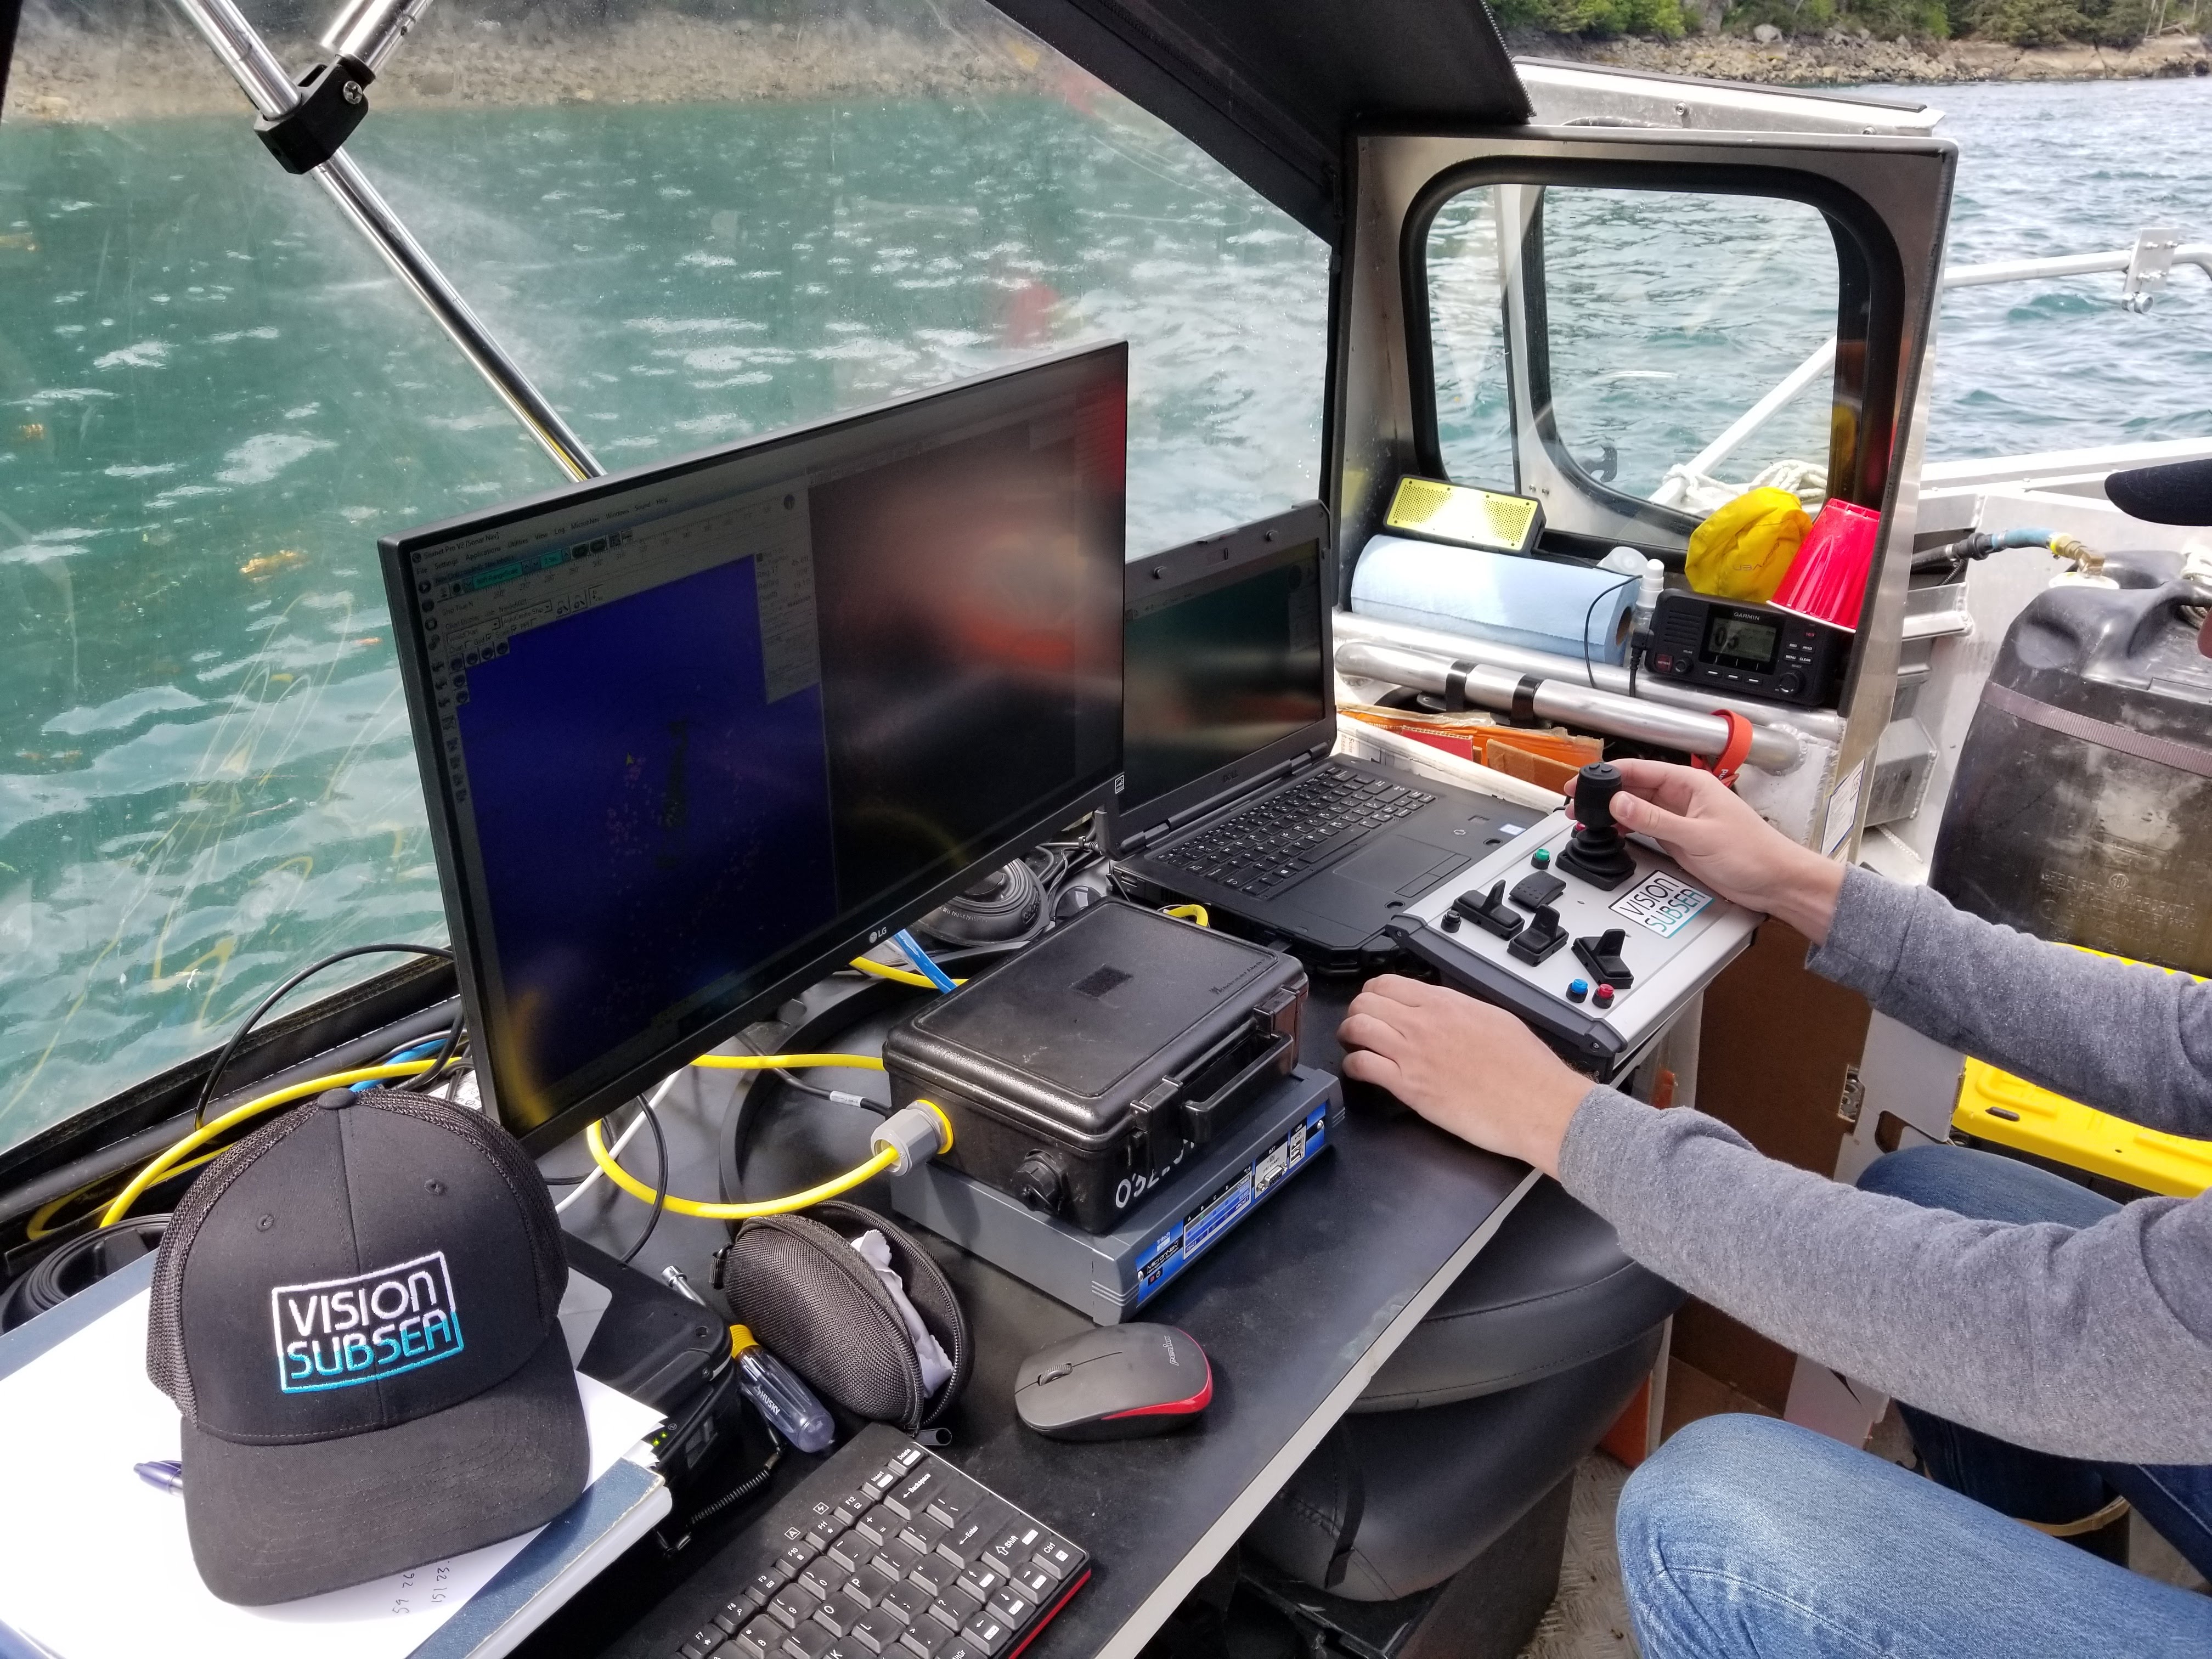 Vision Subsea's quickly mobilized command center